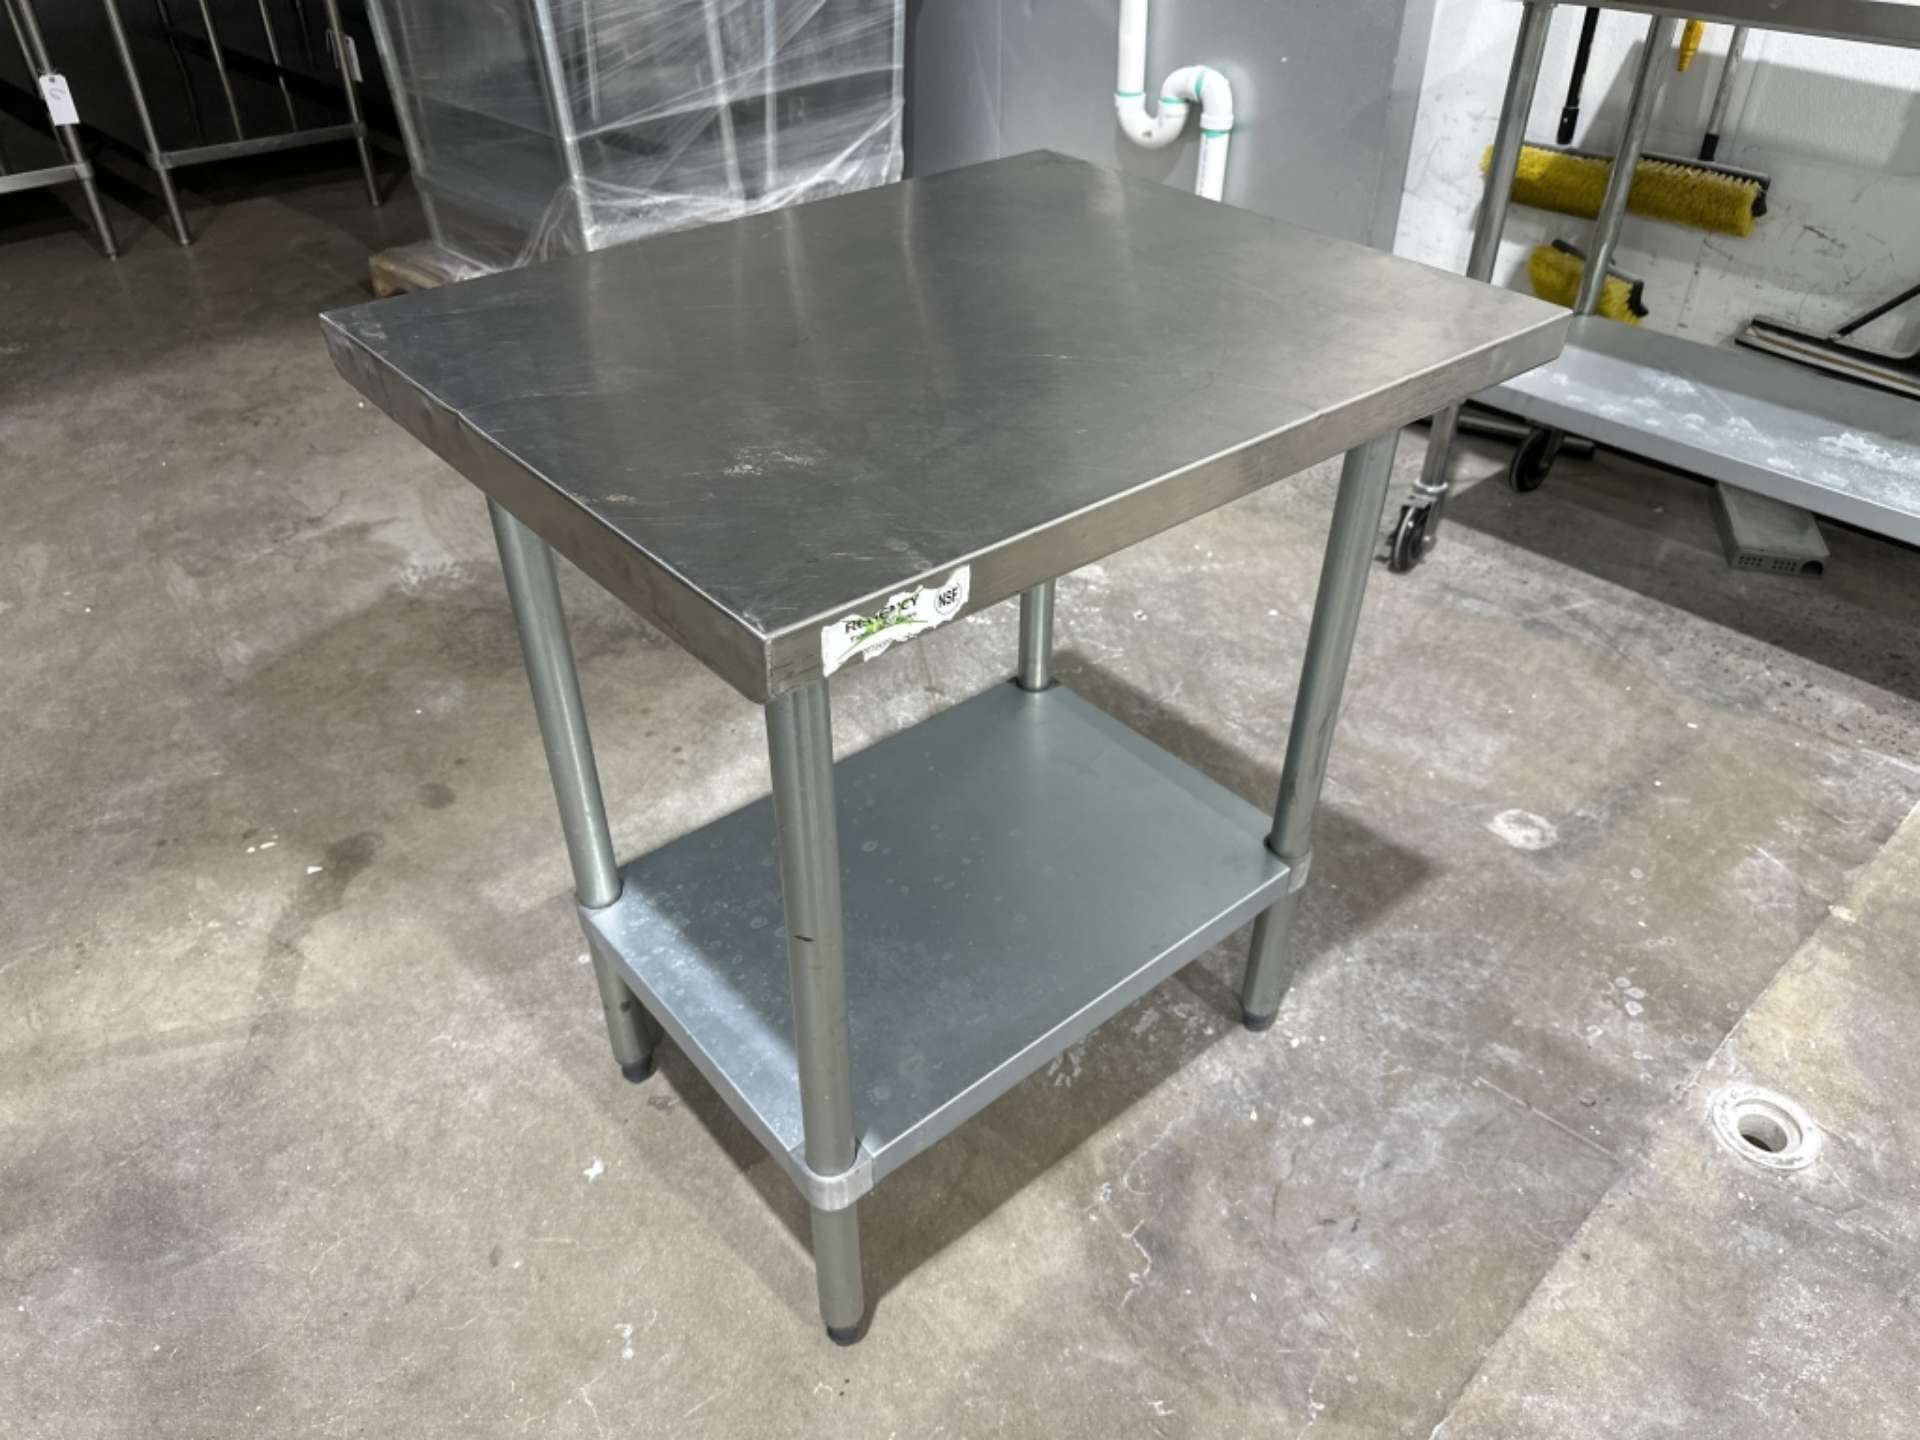 Stainless Steel Prep Table - 3ft x 2.5ft - Image 2 of 2